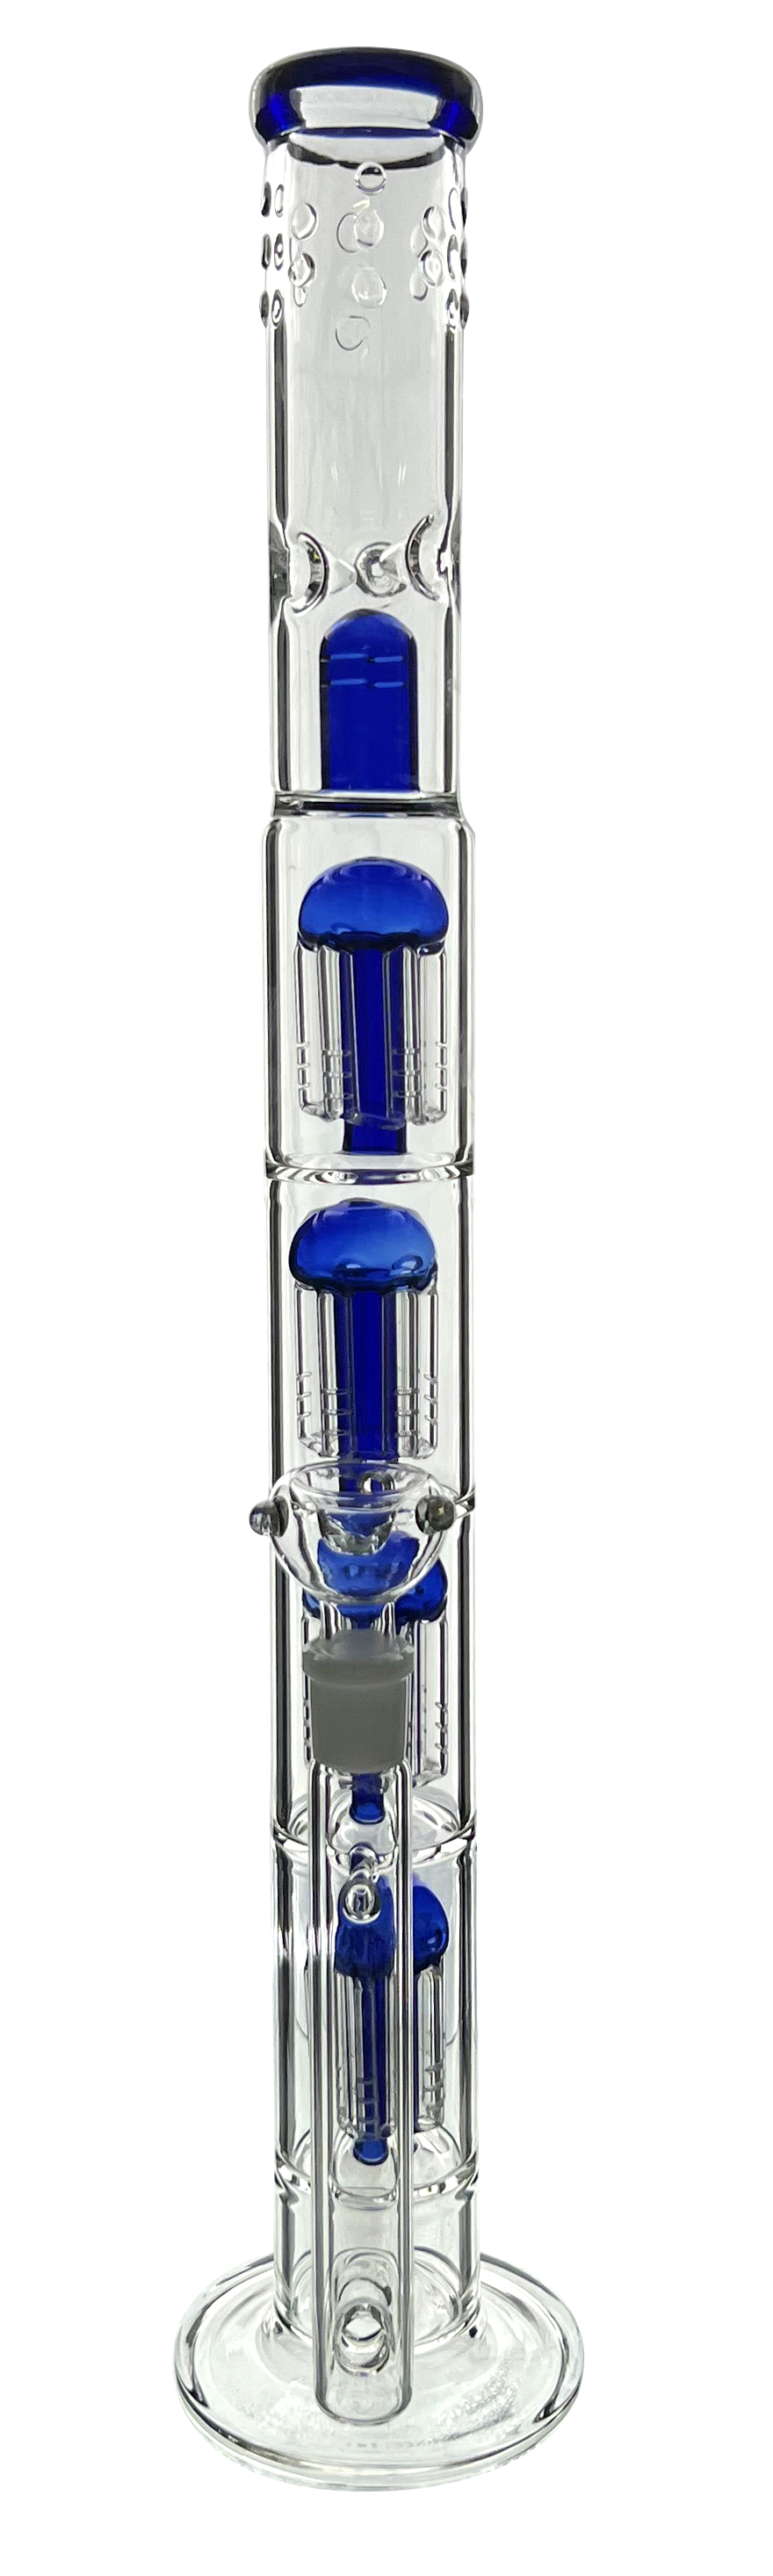 STRAIGHT TUBE WITH 4 TIER TREE PERC WITH FLASHGUARD - Limitless Puff